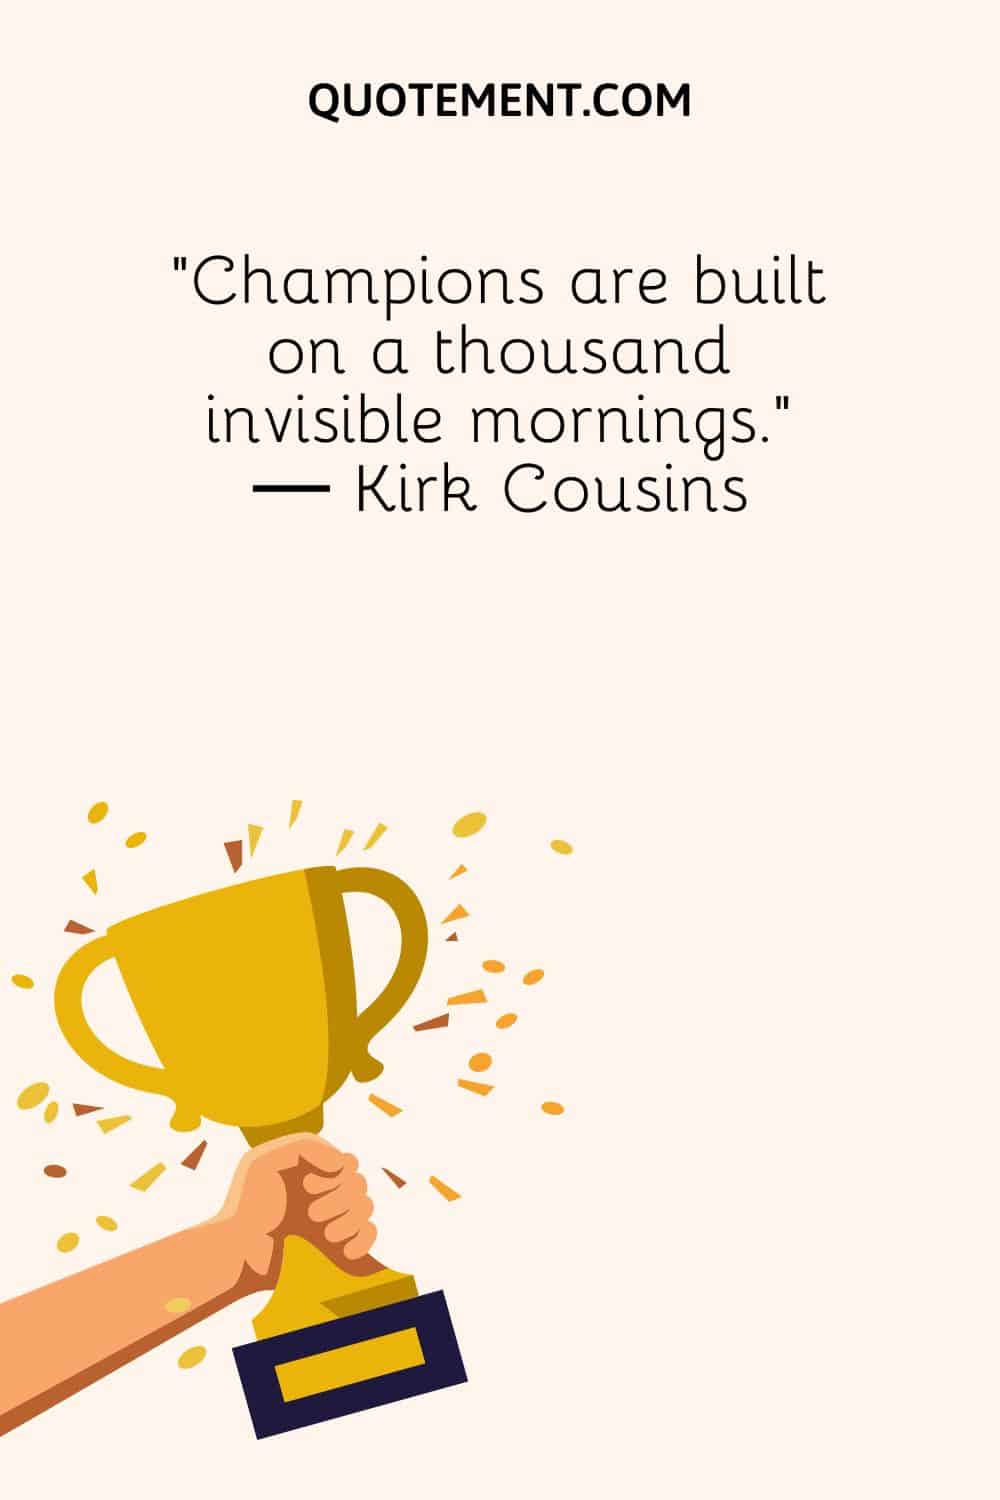 “Champions are built on a thousand invisible mornings.” ― Kirk Cousins